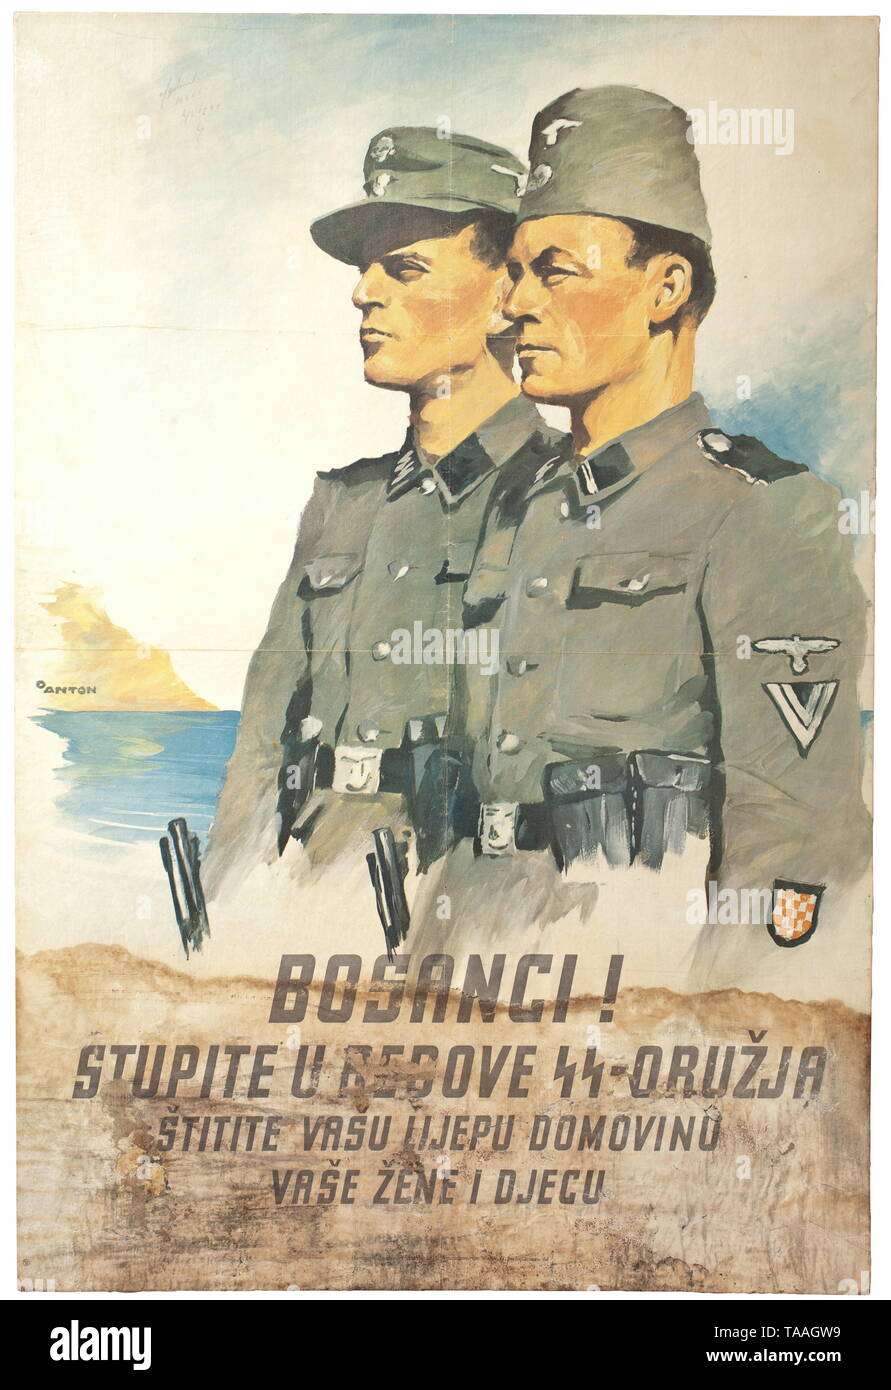 A Croatian promotional poster for the Waffen-SS design by Ottomar Anton (1895 - 1976) historic, historical, 20th century, 1930s, 1940s, Waffen-SS, armed division of the SS, armed service, armed services, NS, National Socialism, Nazism, Third Reich, German Reich, Germany, military, militaria, utensil, piece of equipment, utensils, object, objects, stills, clipping, clippings, cut out, cut-out, cut-outs, fascism, fascistic, National Socialist, Nazi, Nazi period, Editorial-Use-Only Stock Photo